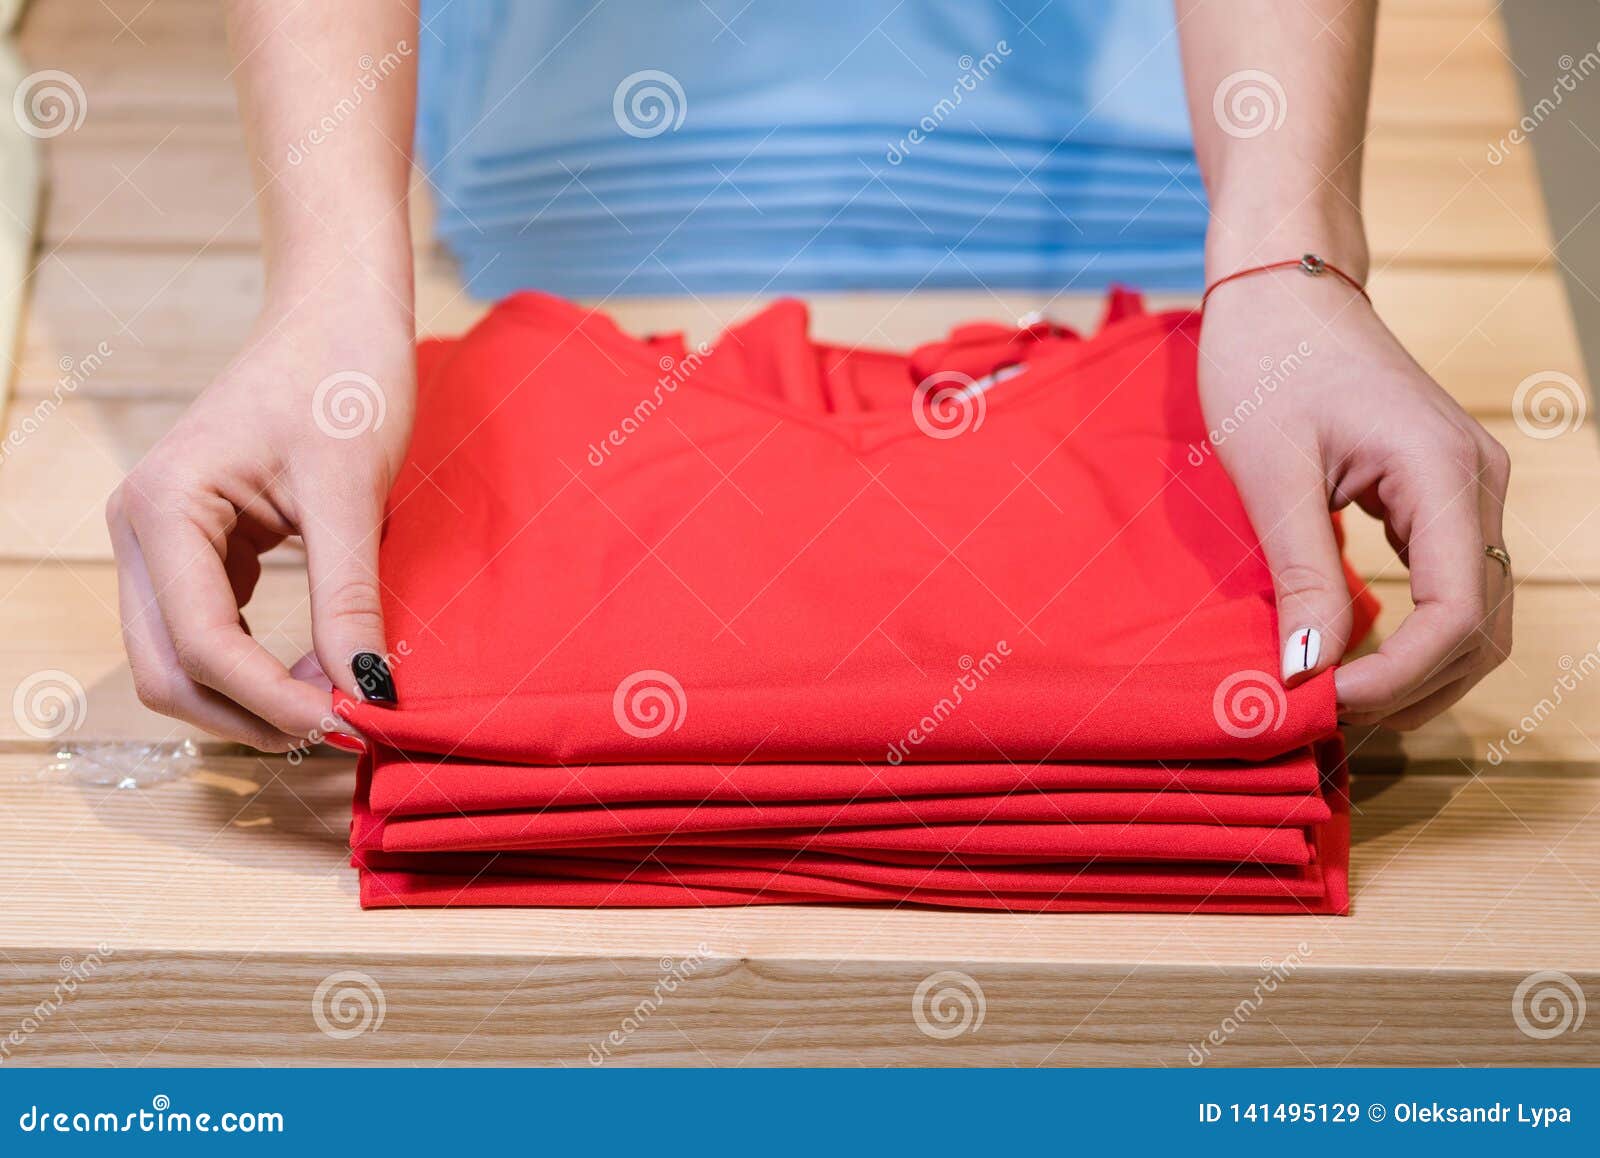 female hands fold red shirts, clothing store